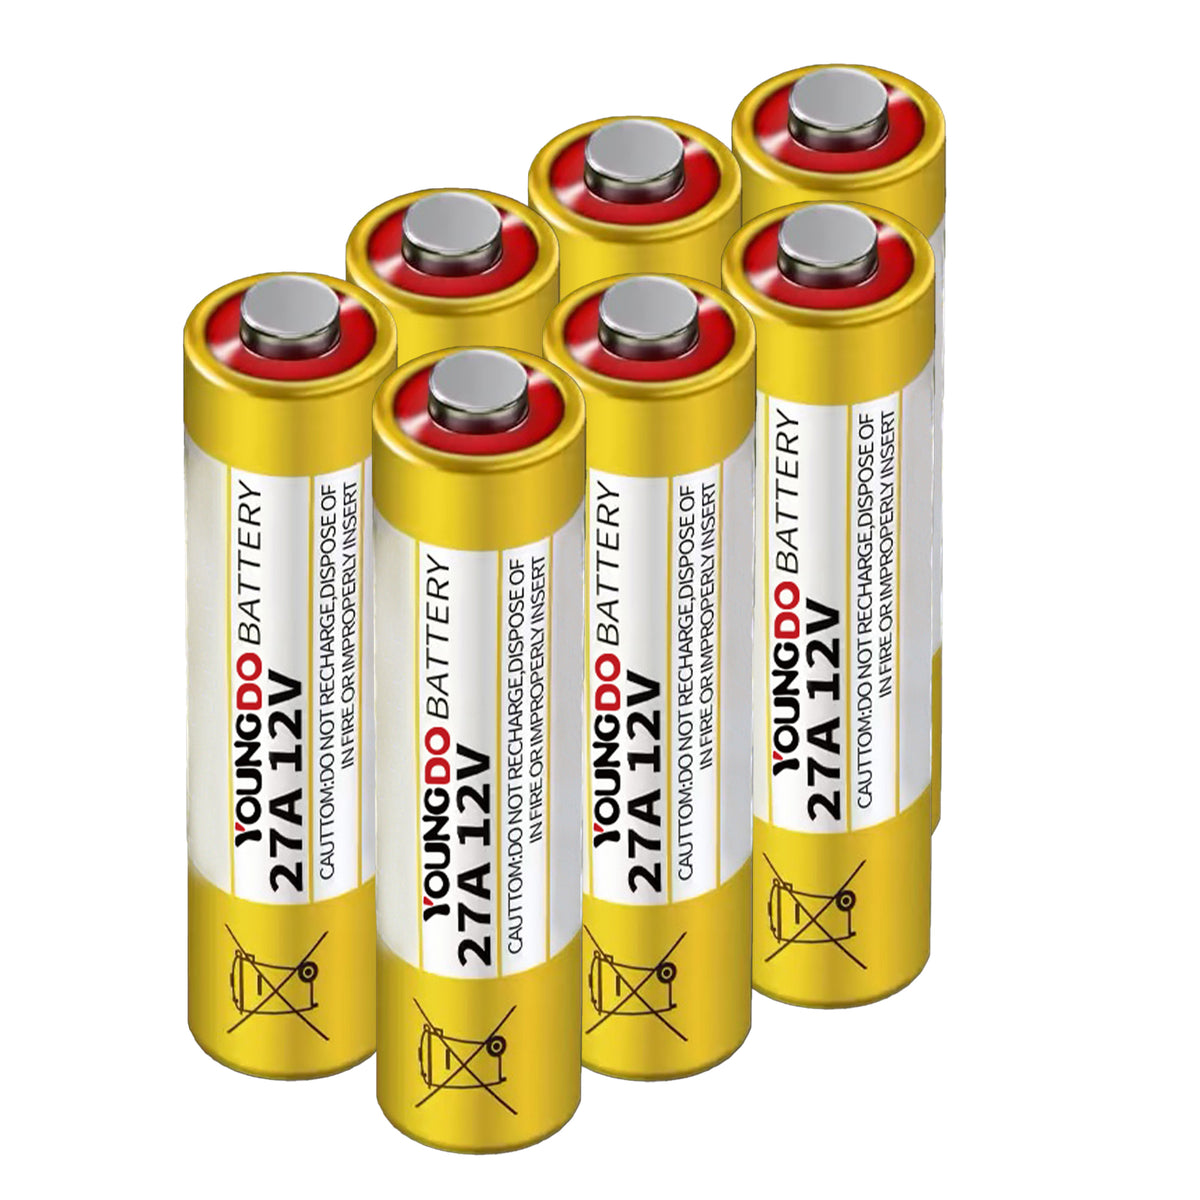 YOUNGDO 6-Count AA Batteries, Reclosable Packaging